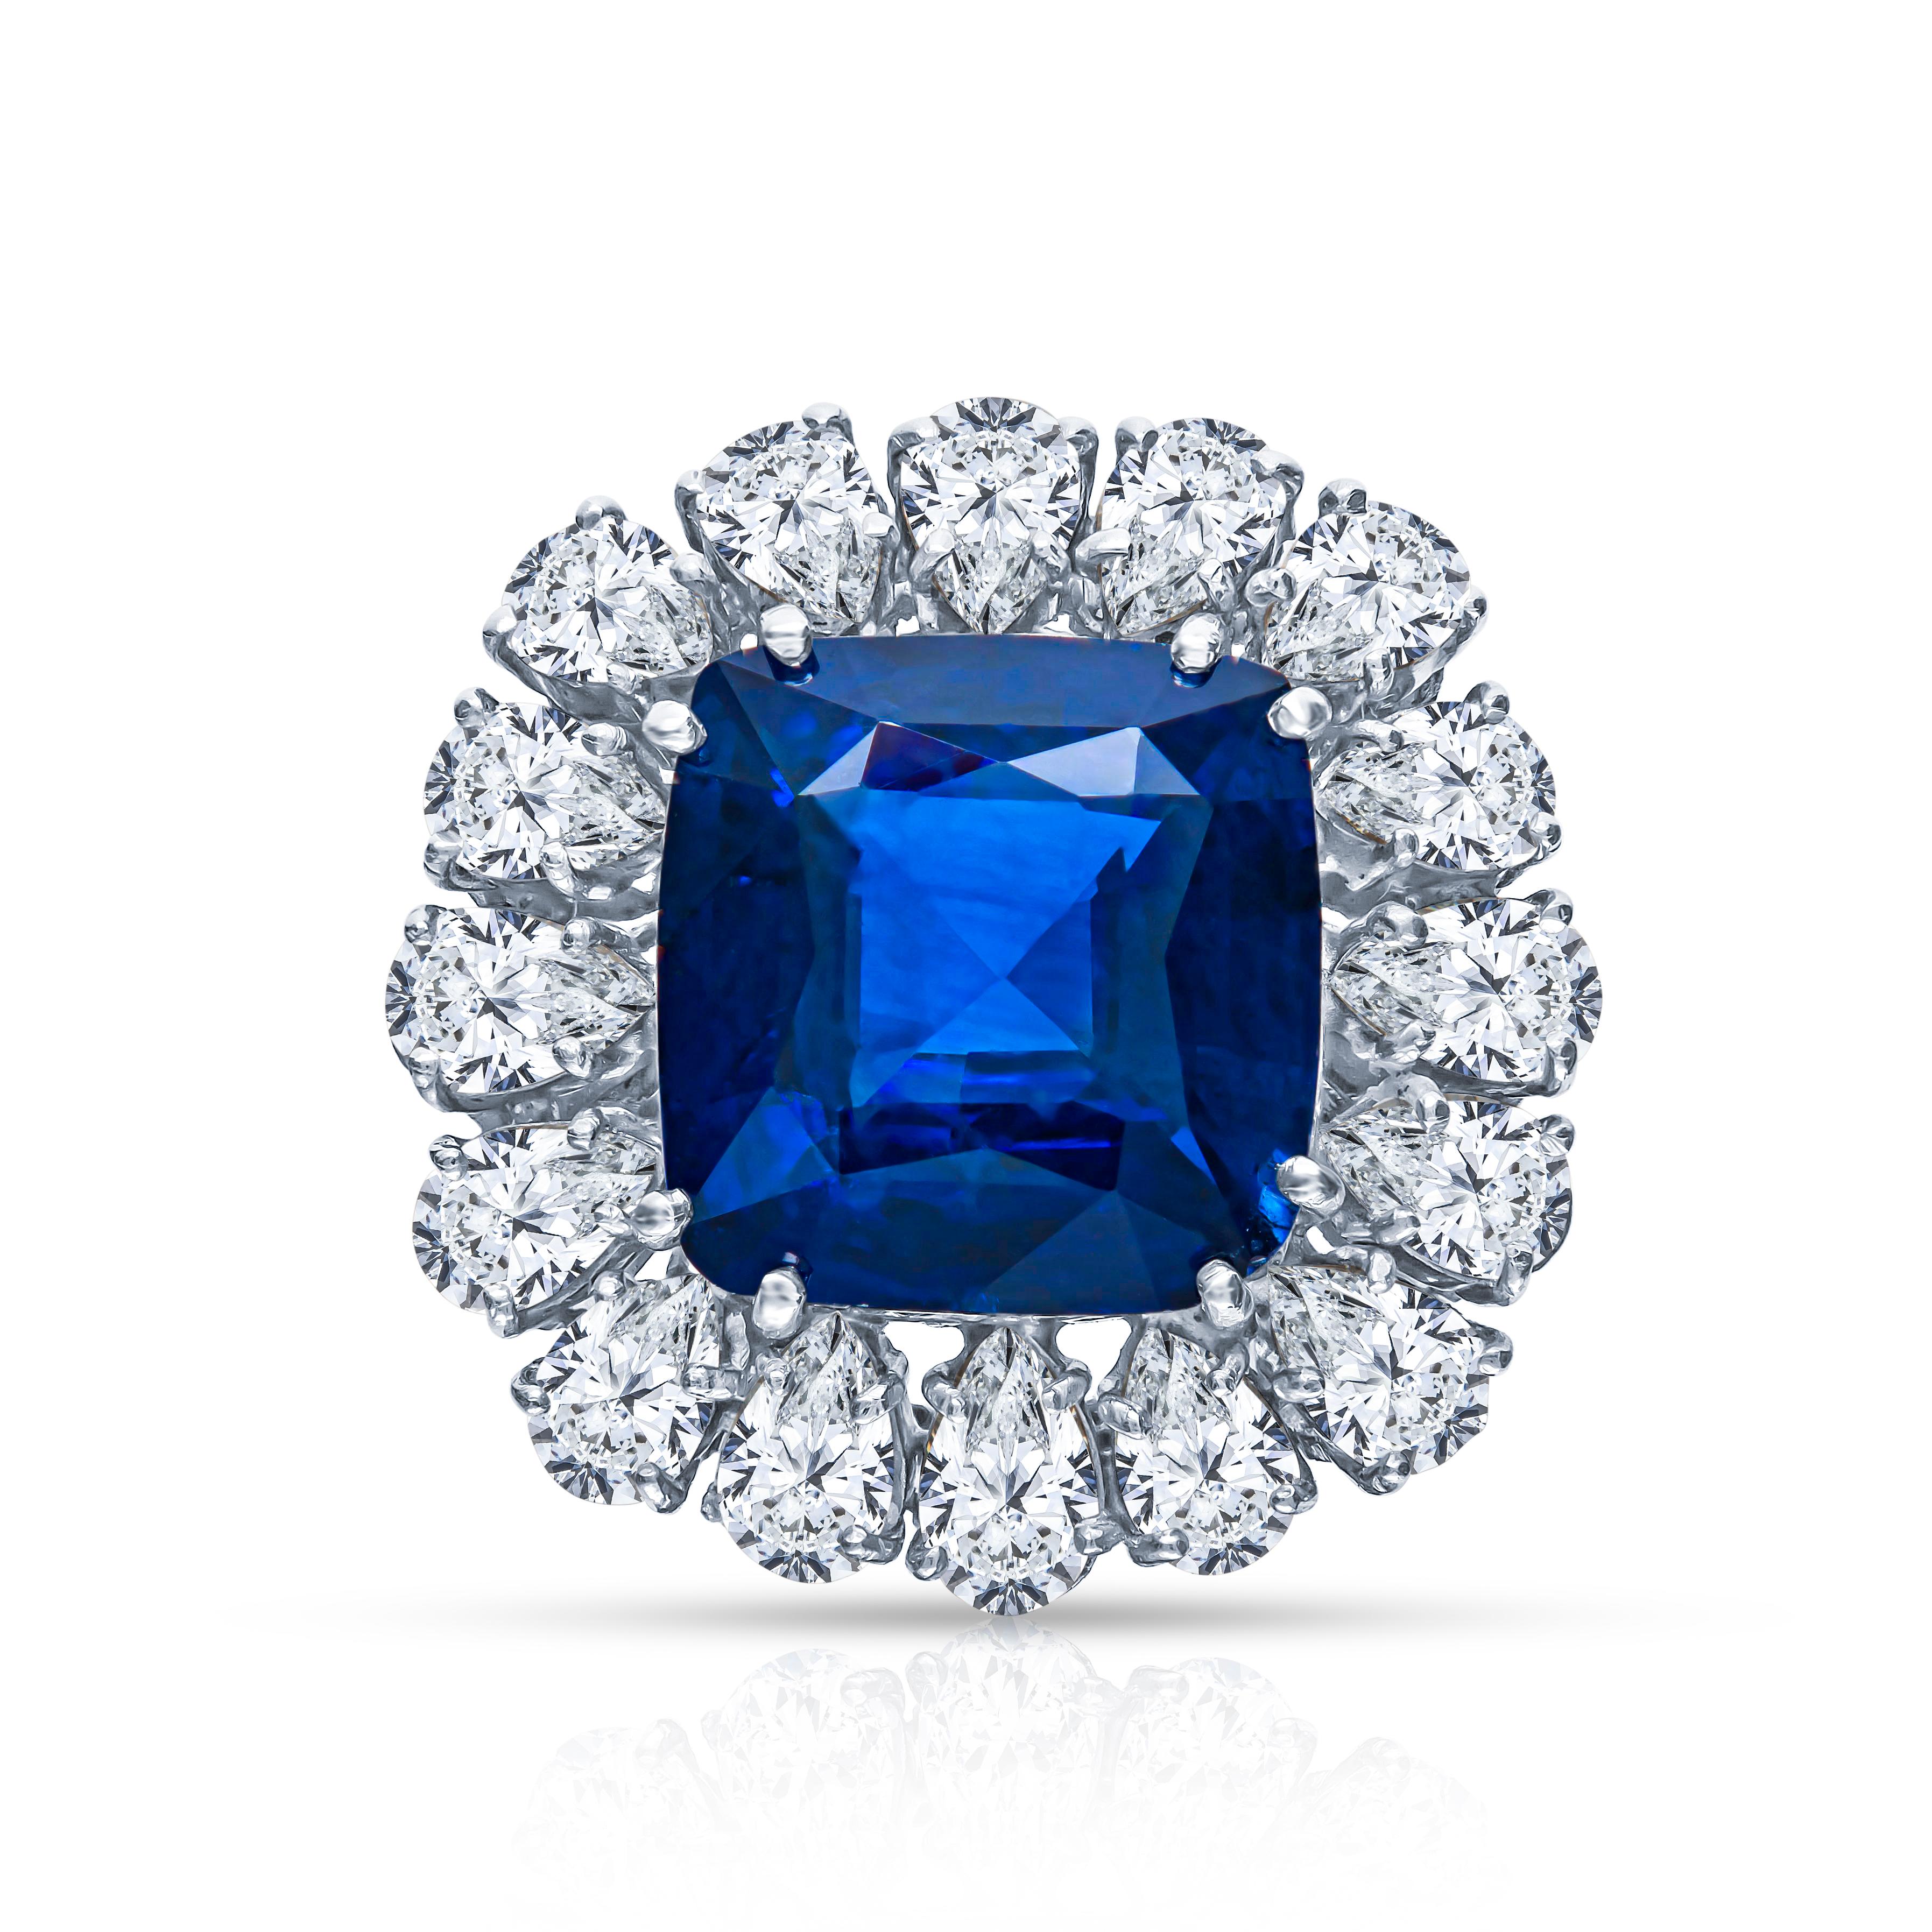 This is an absolutely gorgeous Estate Antique Platinum GRS Certifies 14.13 CTW Cushion Cut Sapphire And Diamond Engagement Ring. The center stone is a Sri Lanka Sapphire vivid royal blue color. It weighs 9.33 carats and is mounted in a gorgeous Art